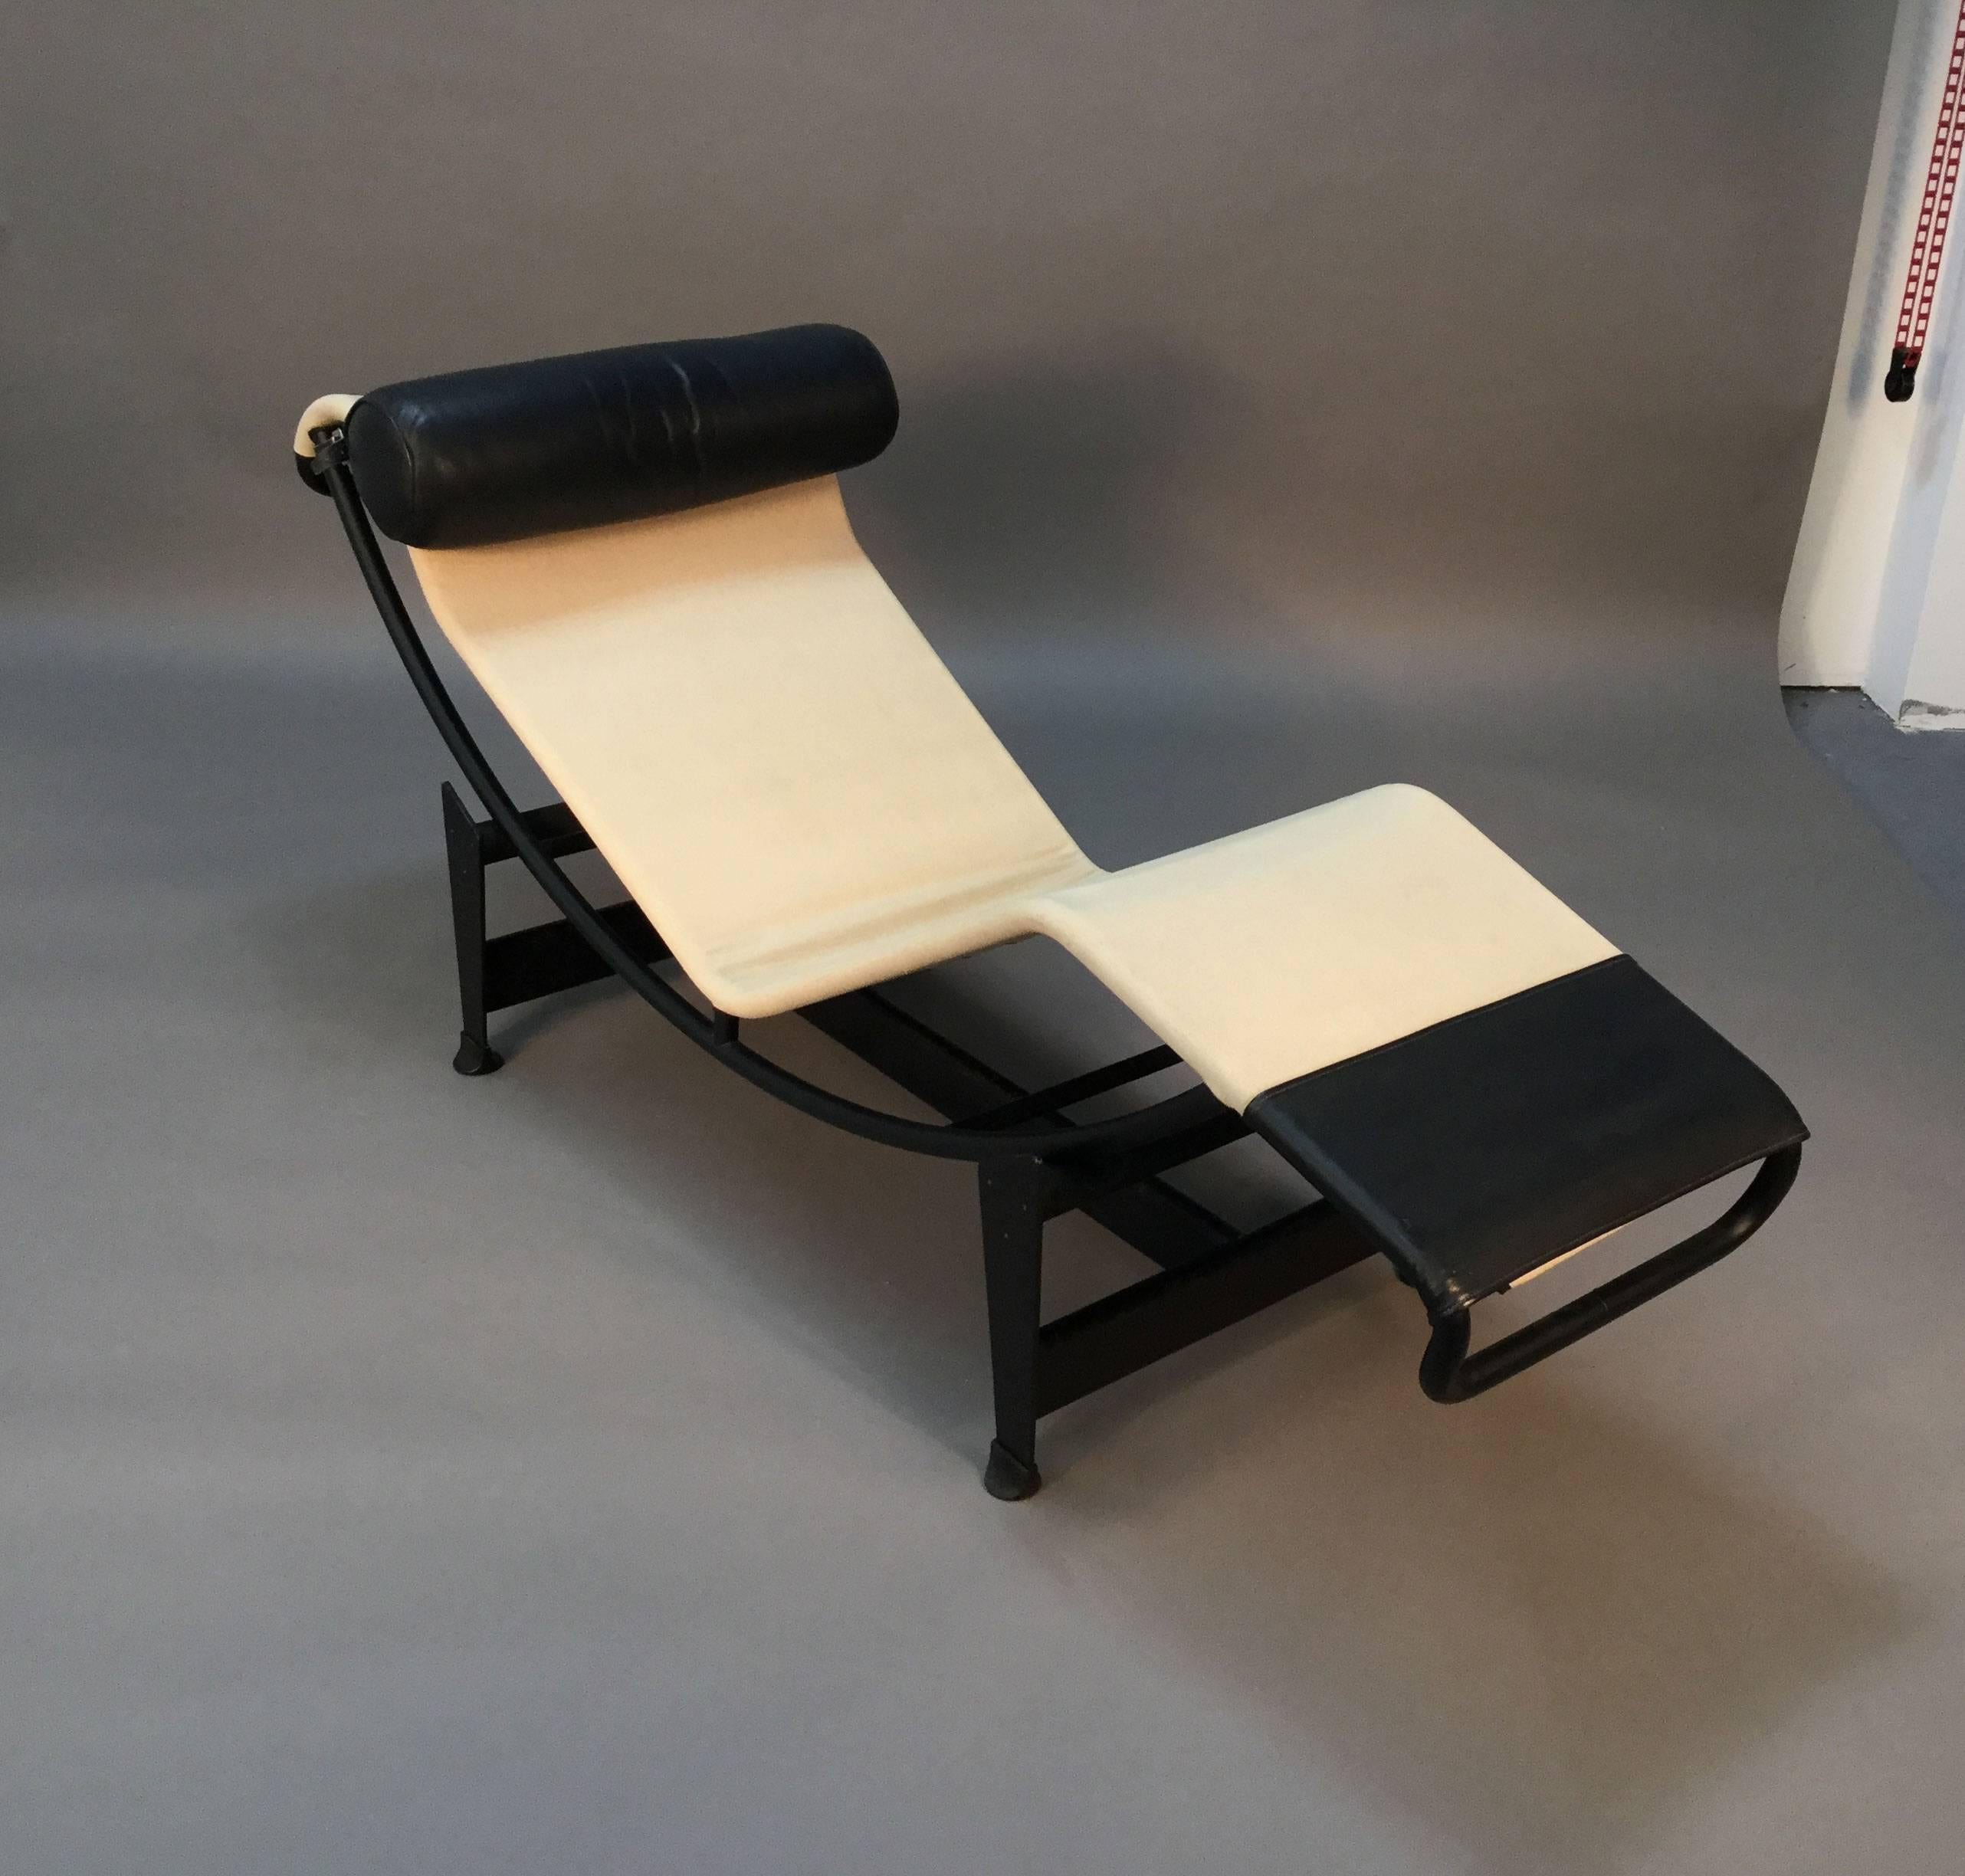 Very rare canvas and leather LC4 Le Corbusier chaise by Cassina. Signed and numbered on both the chaise tubing as well as the base tubing.